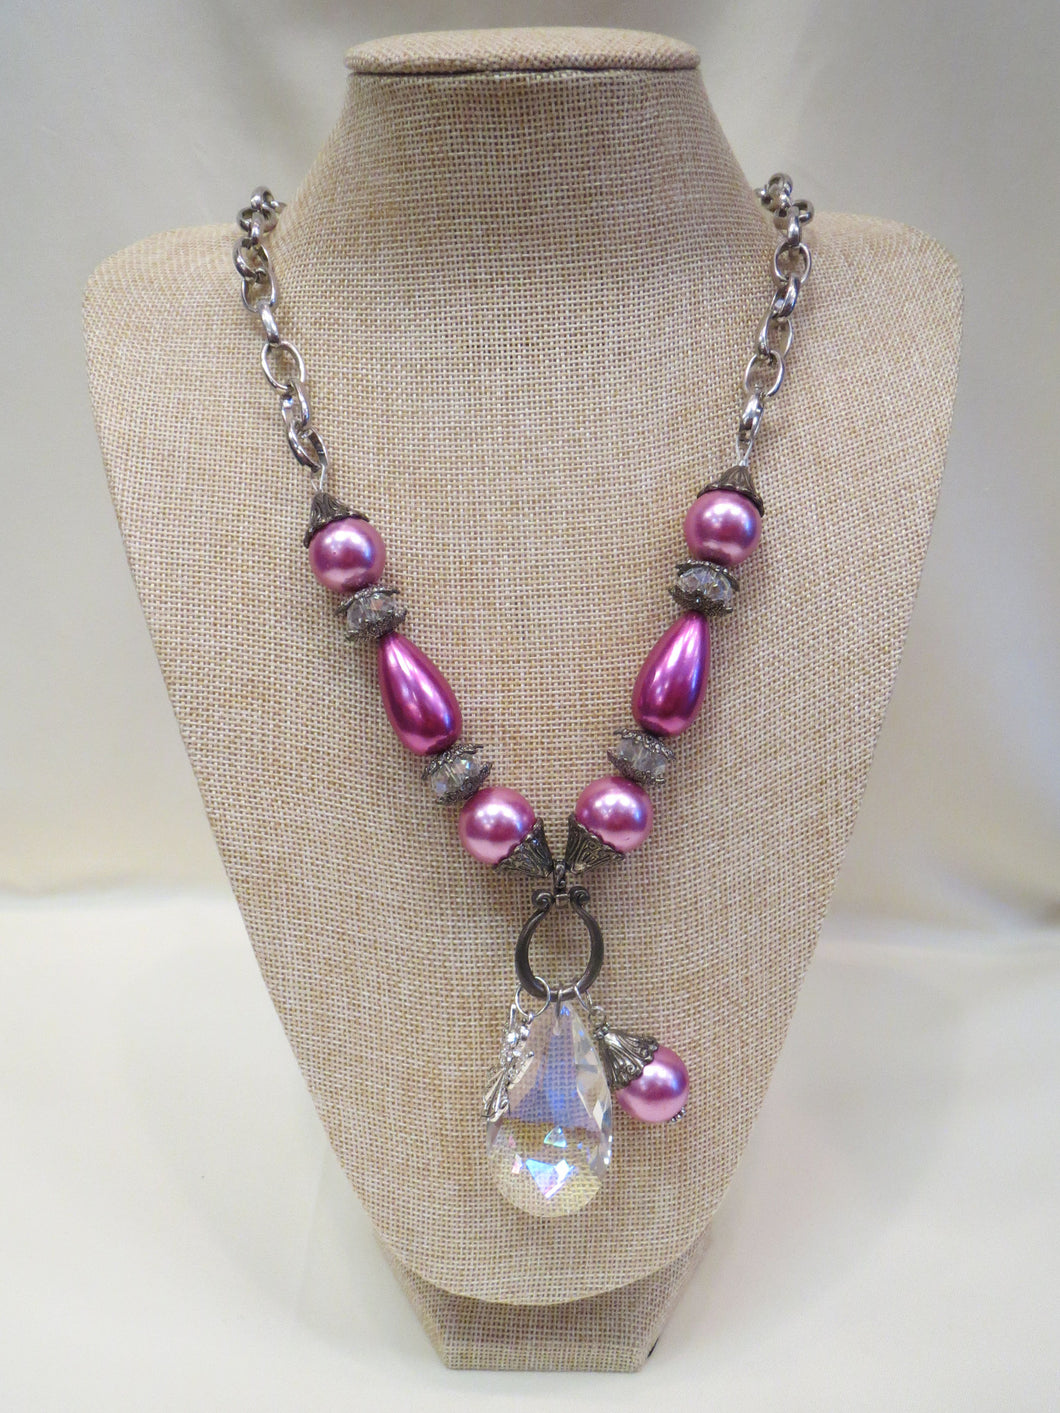 ADO Pink Pearl Necklace w/ Teardrop Crystal | All Dec'd Out